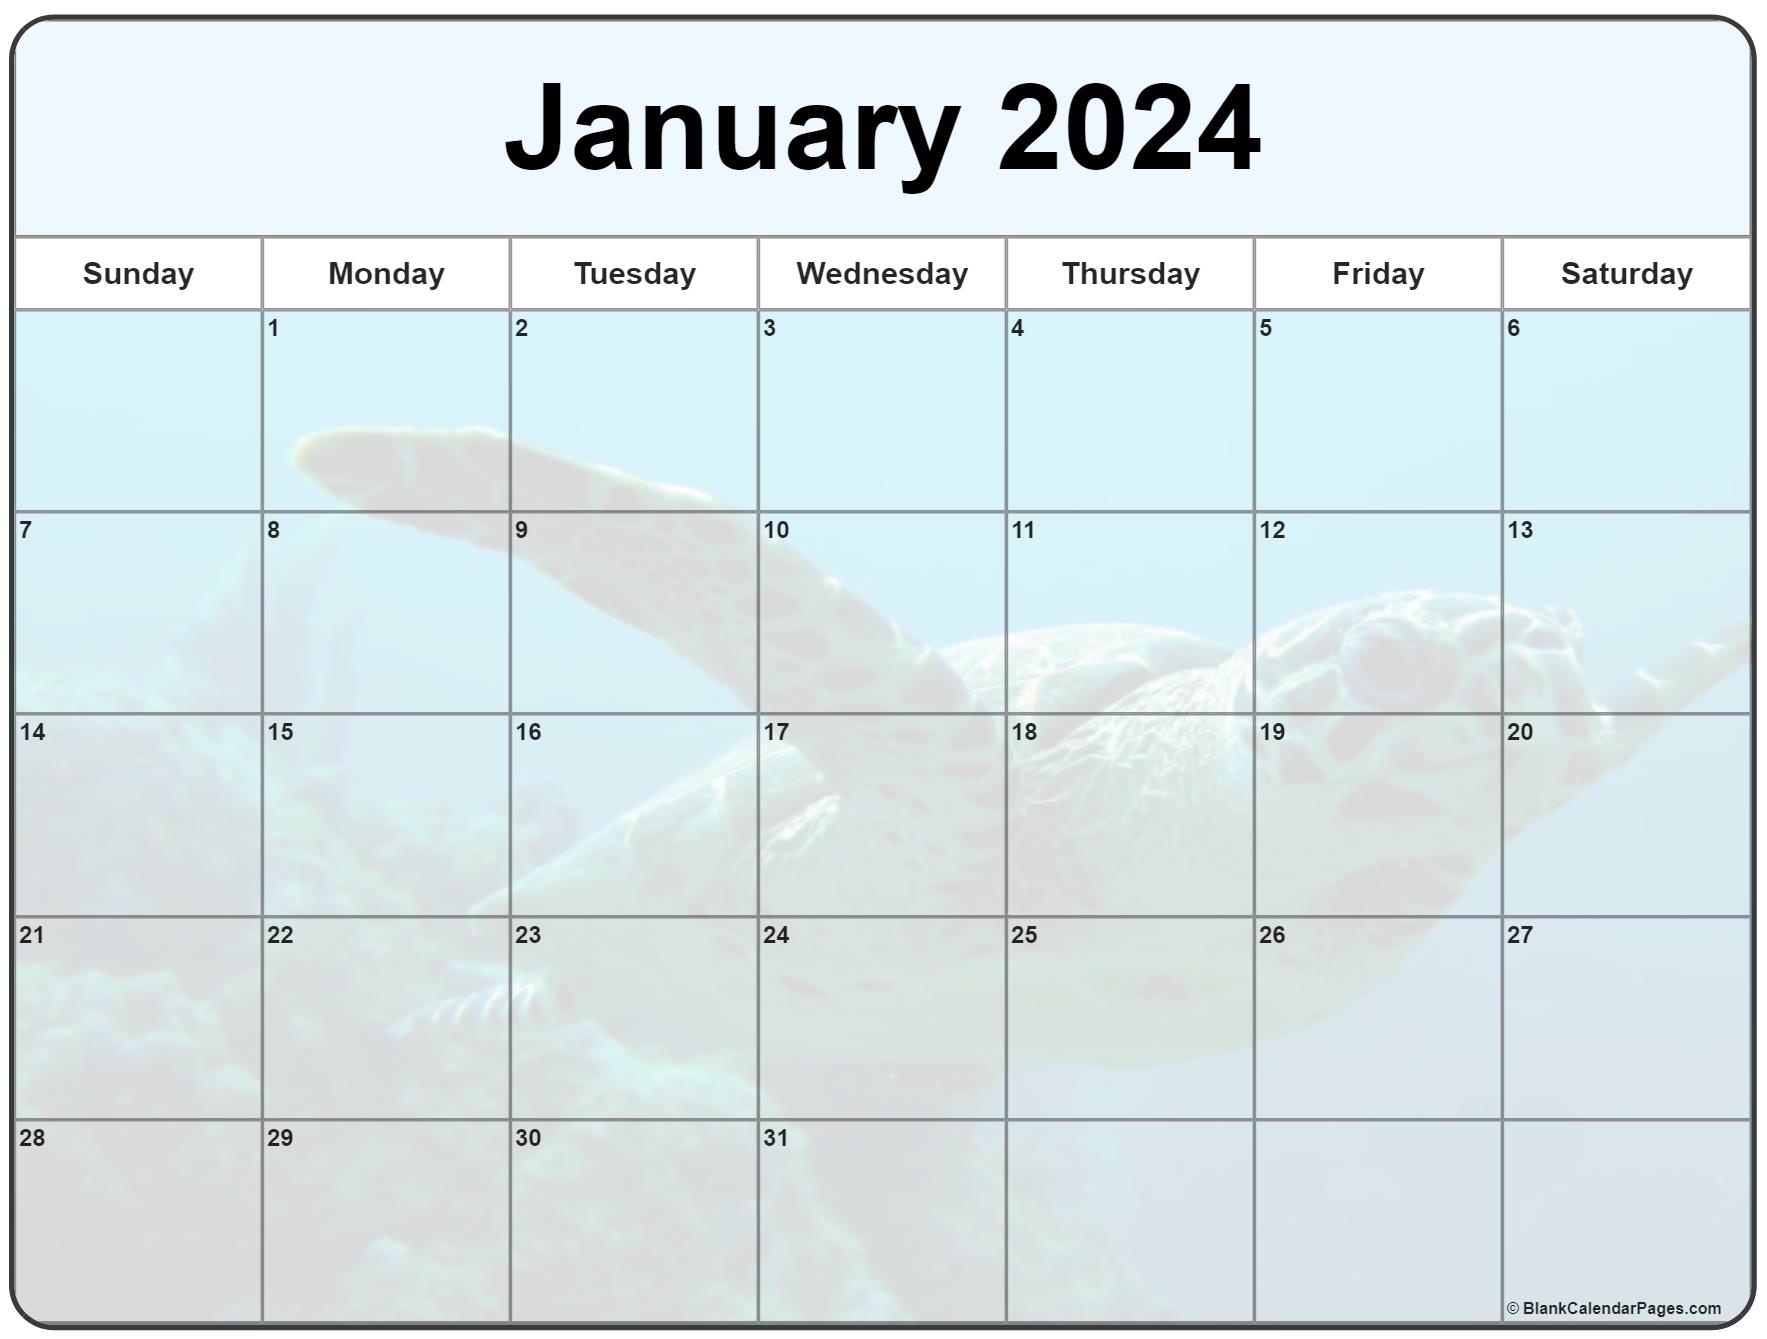 collection-of-january-2023-photo-calendars-with-image-filters